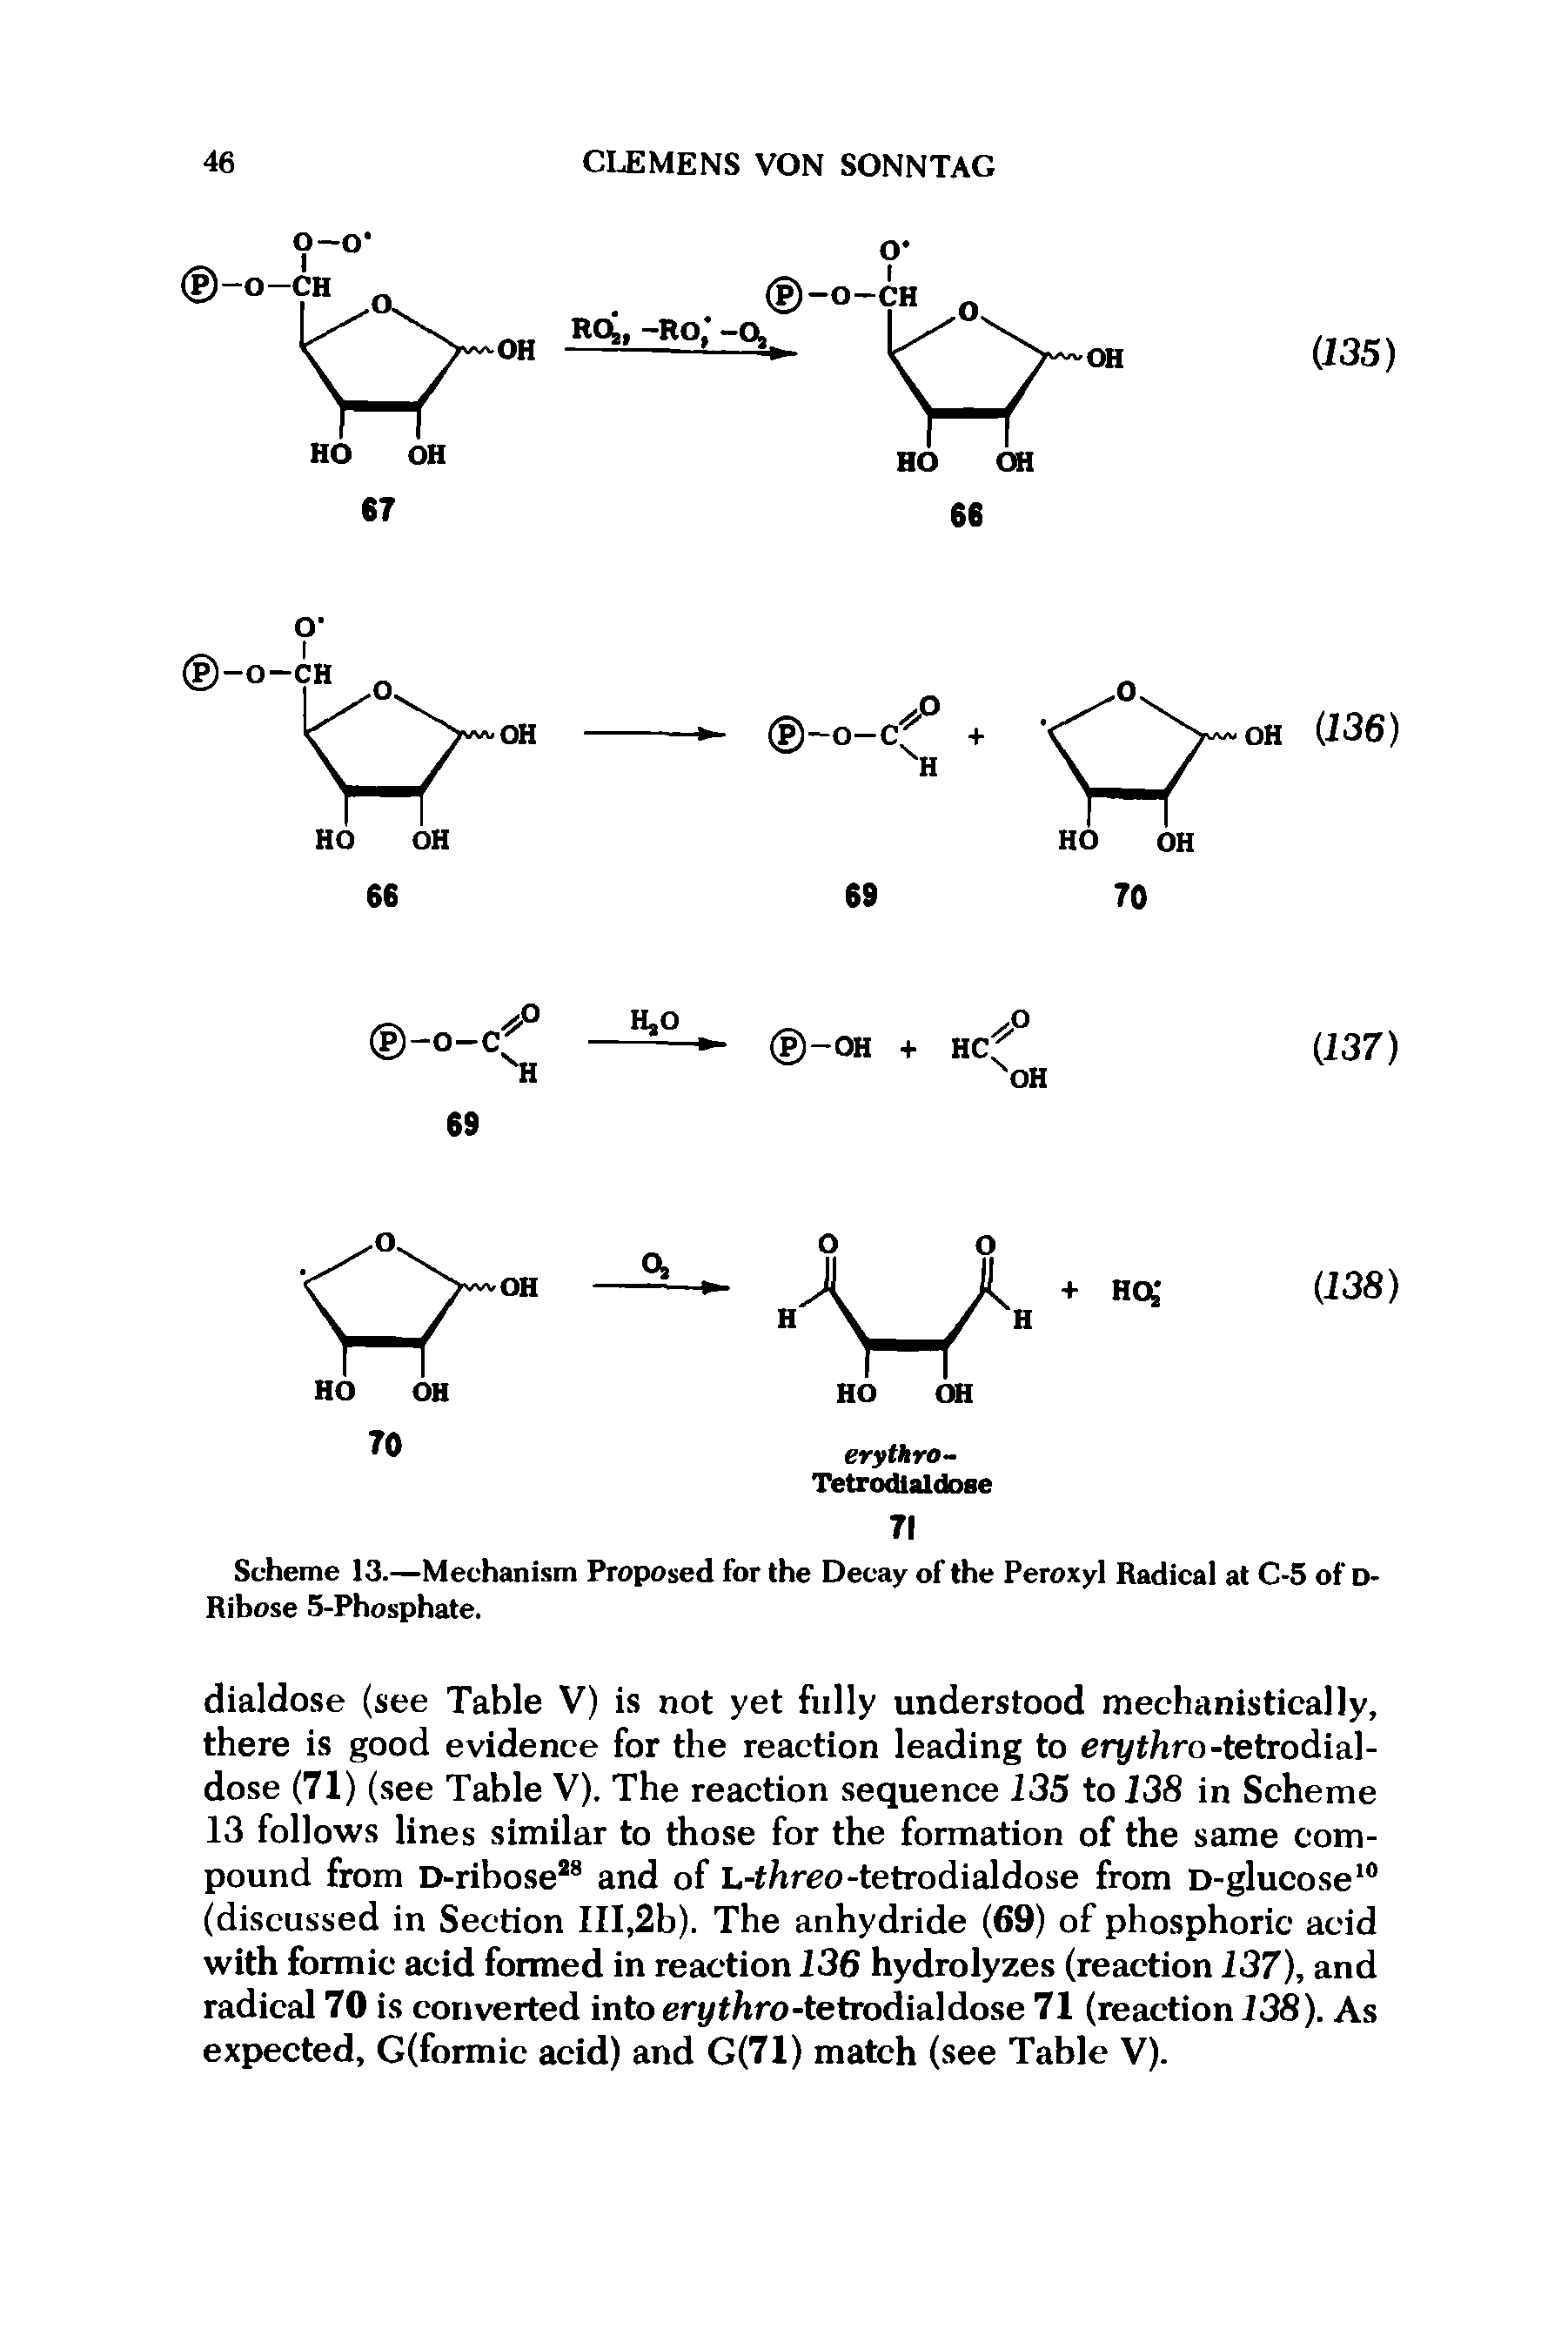 Scheme 13.—Mechanism Proposed for the Decay of the Peroxyl Radical at C-5 of d-Ribose 5-Phosphate.